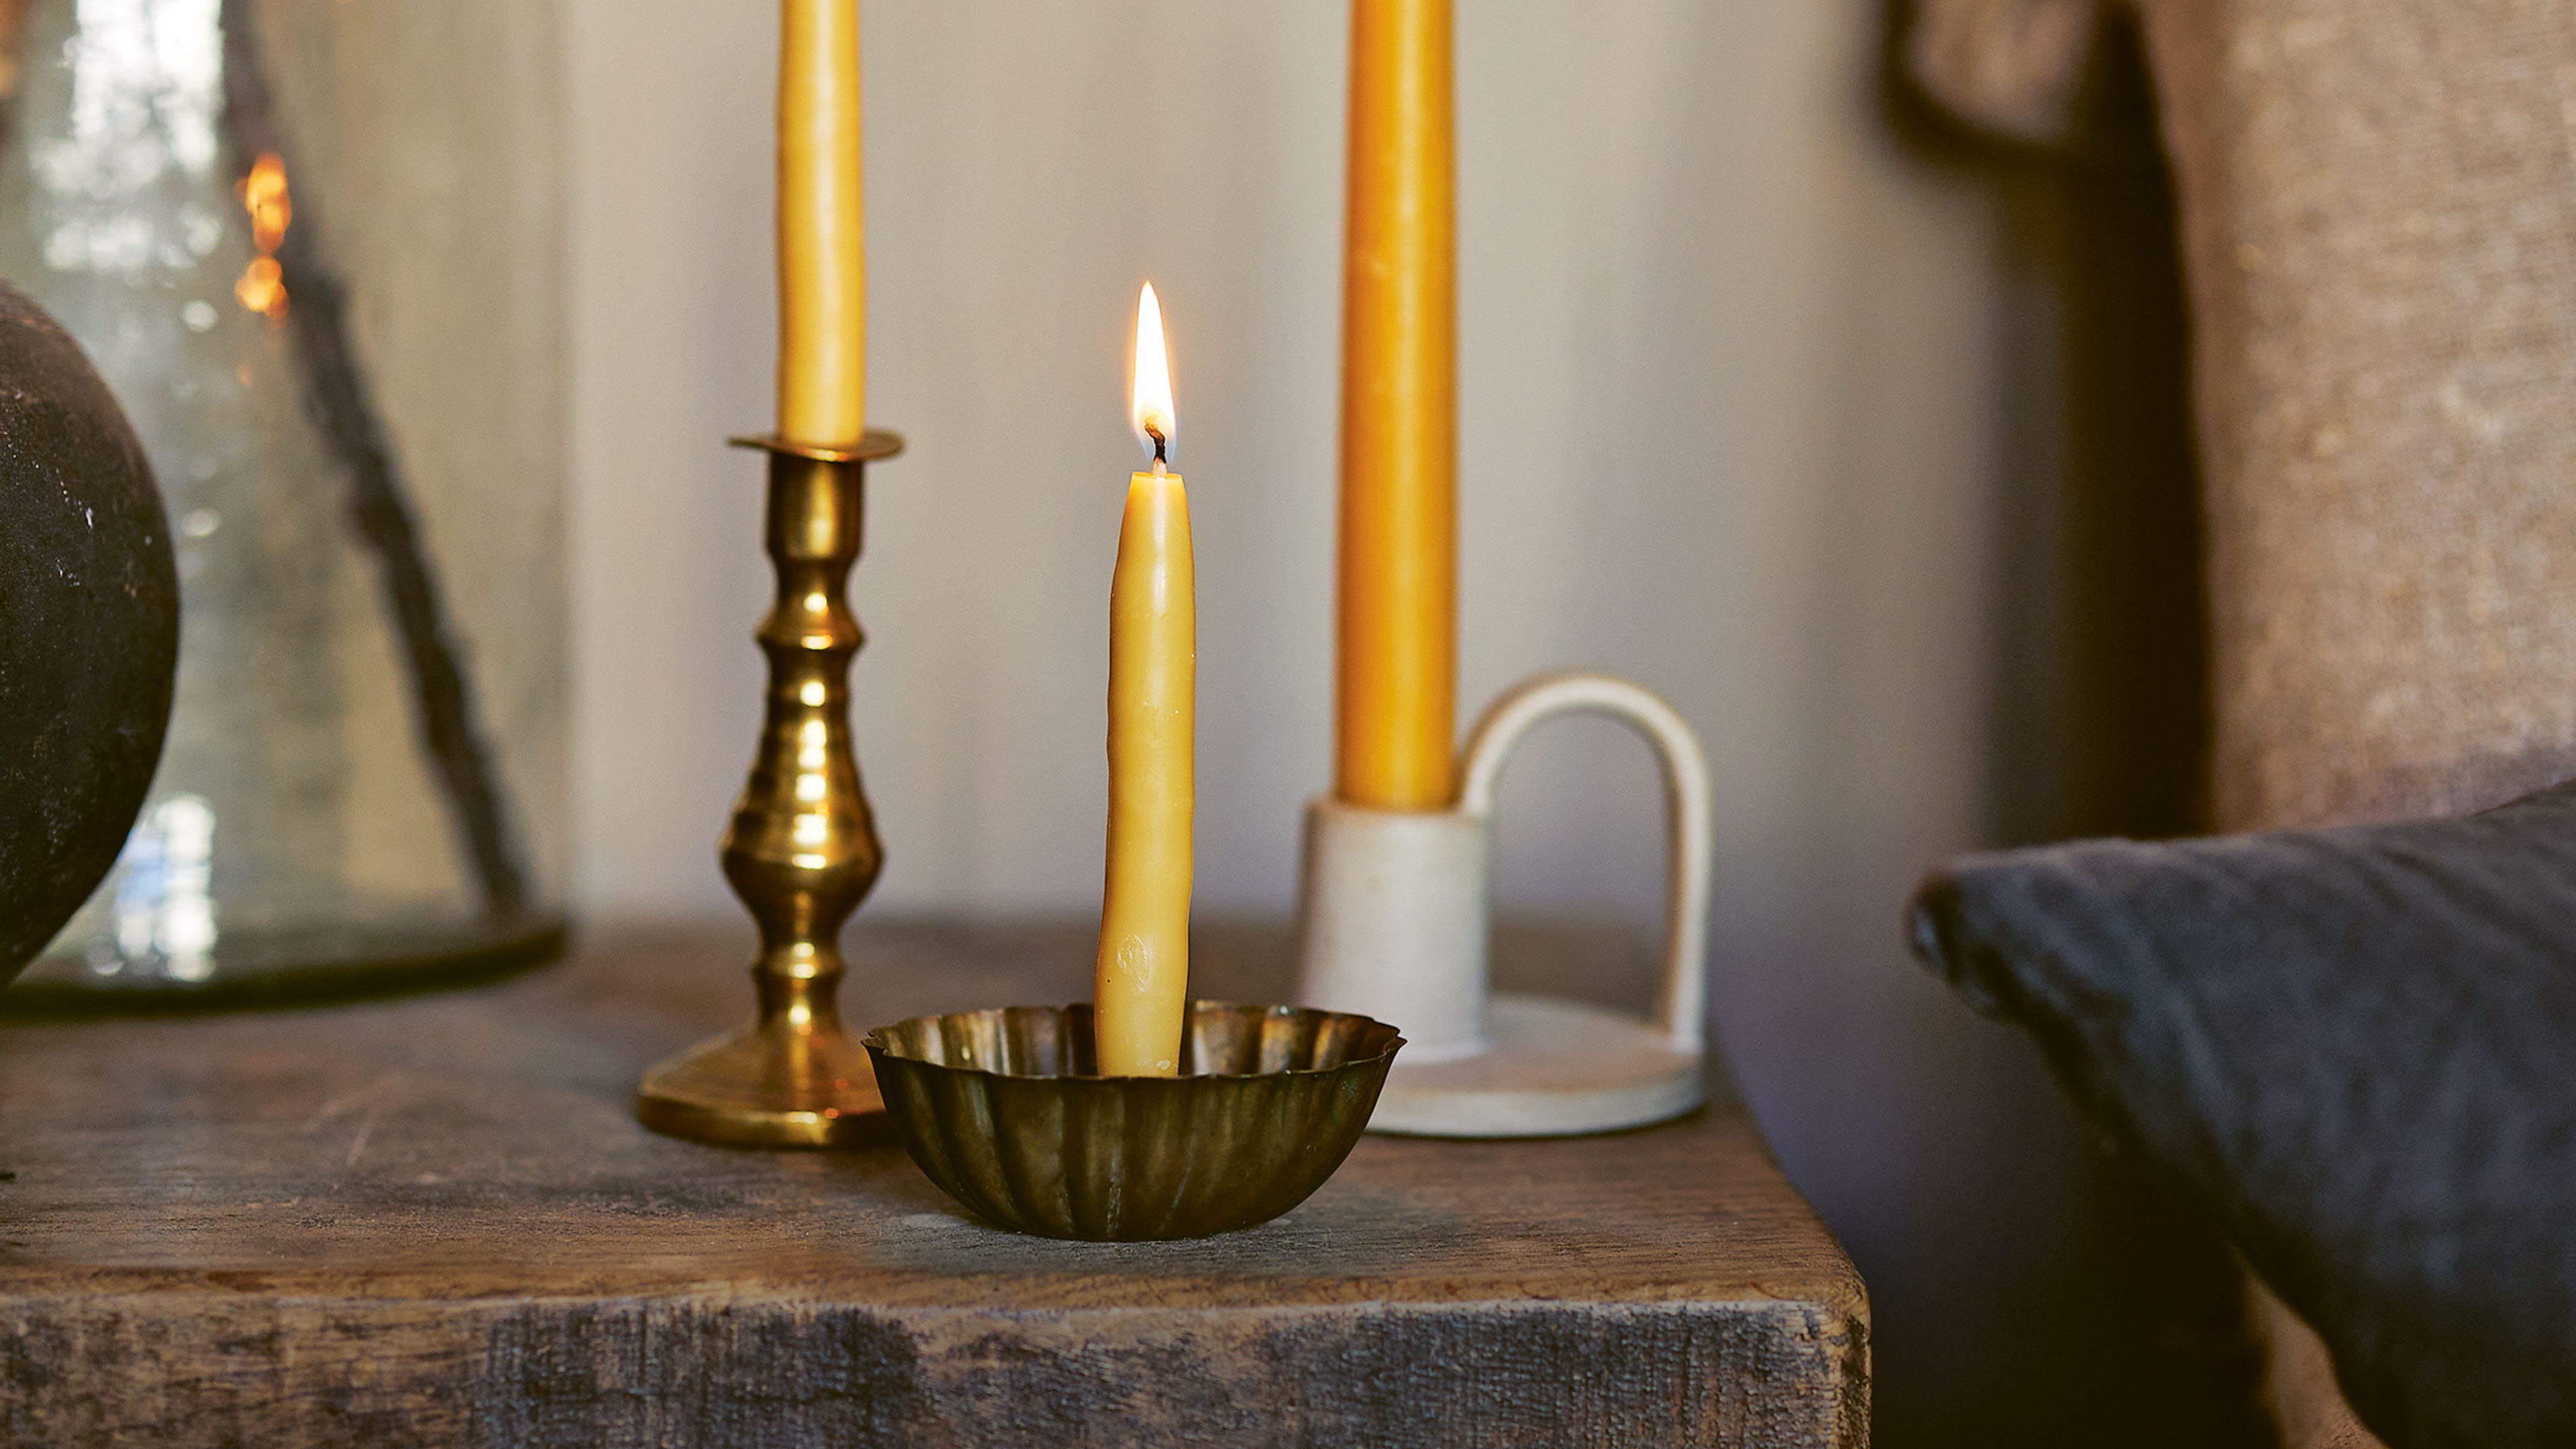 How to make candles: these bees wax-dipped candles are so easy